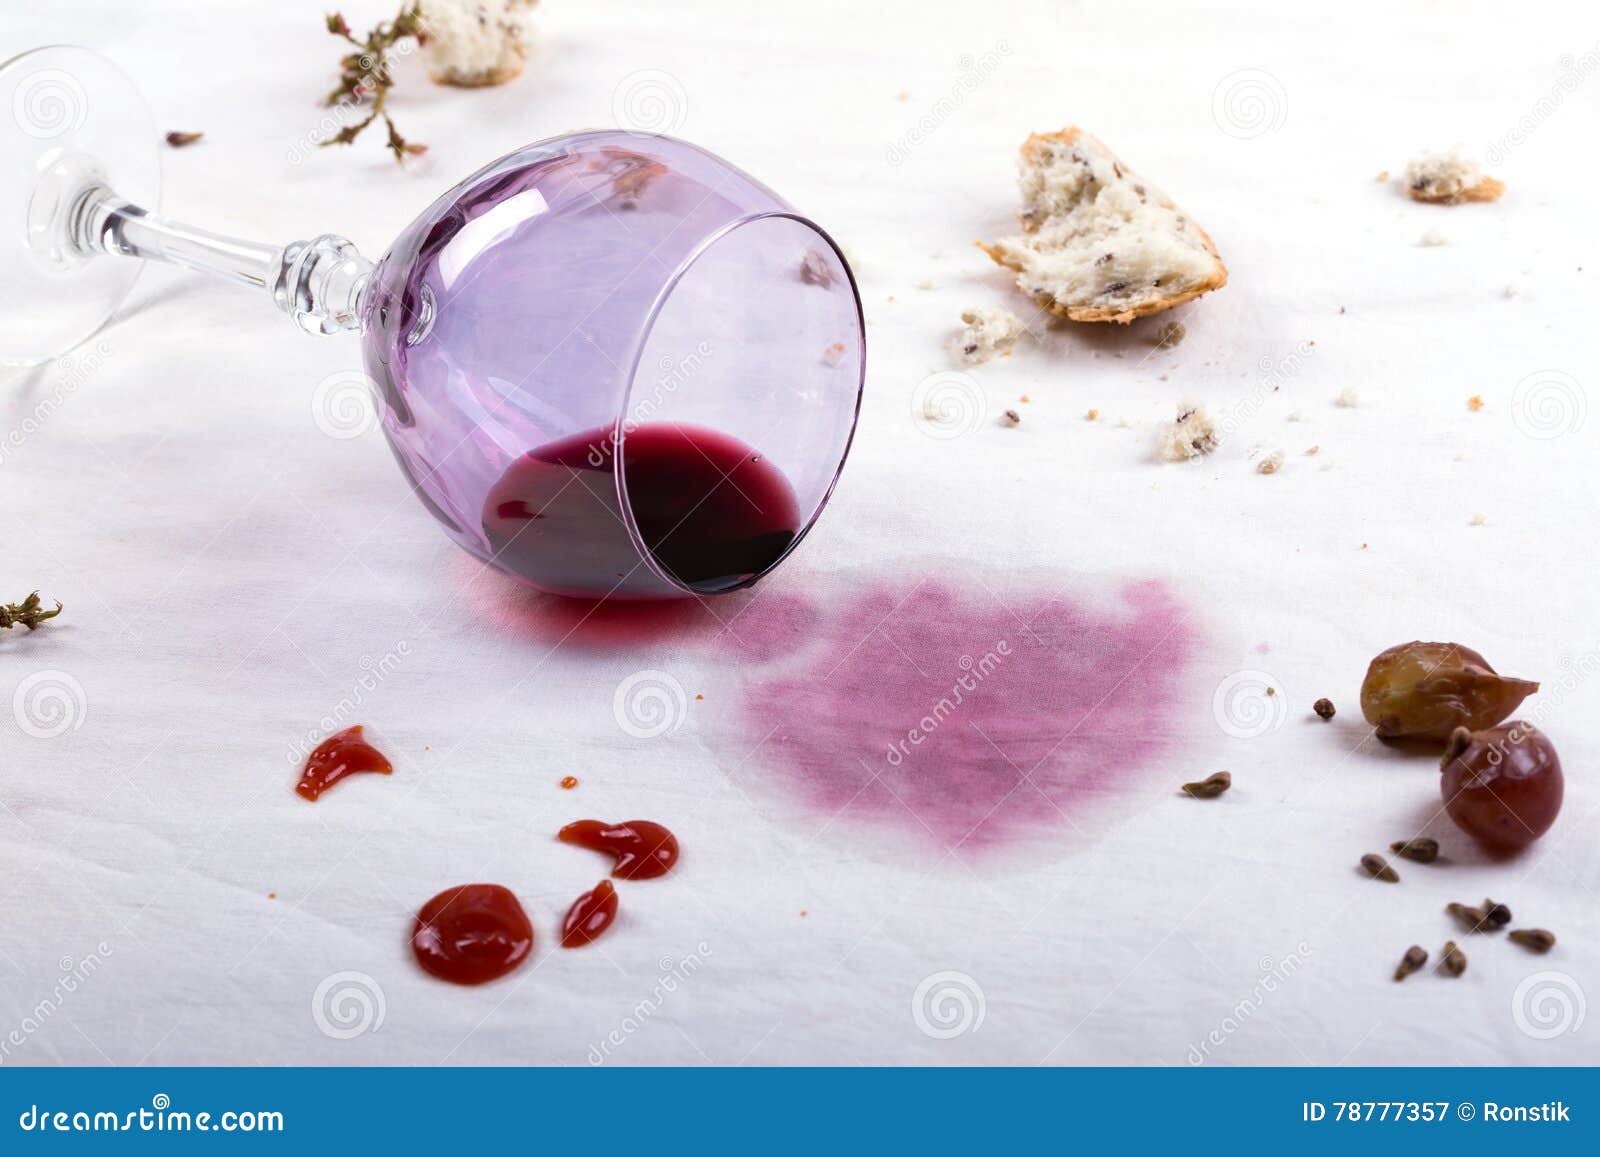 stains on tablecloth of spilled wine glass and food